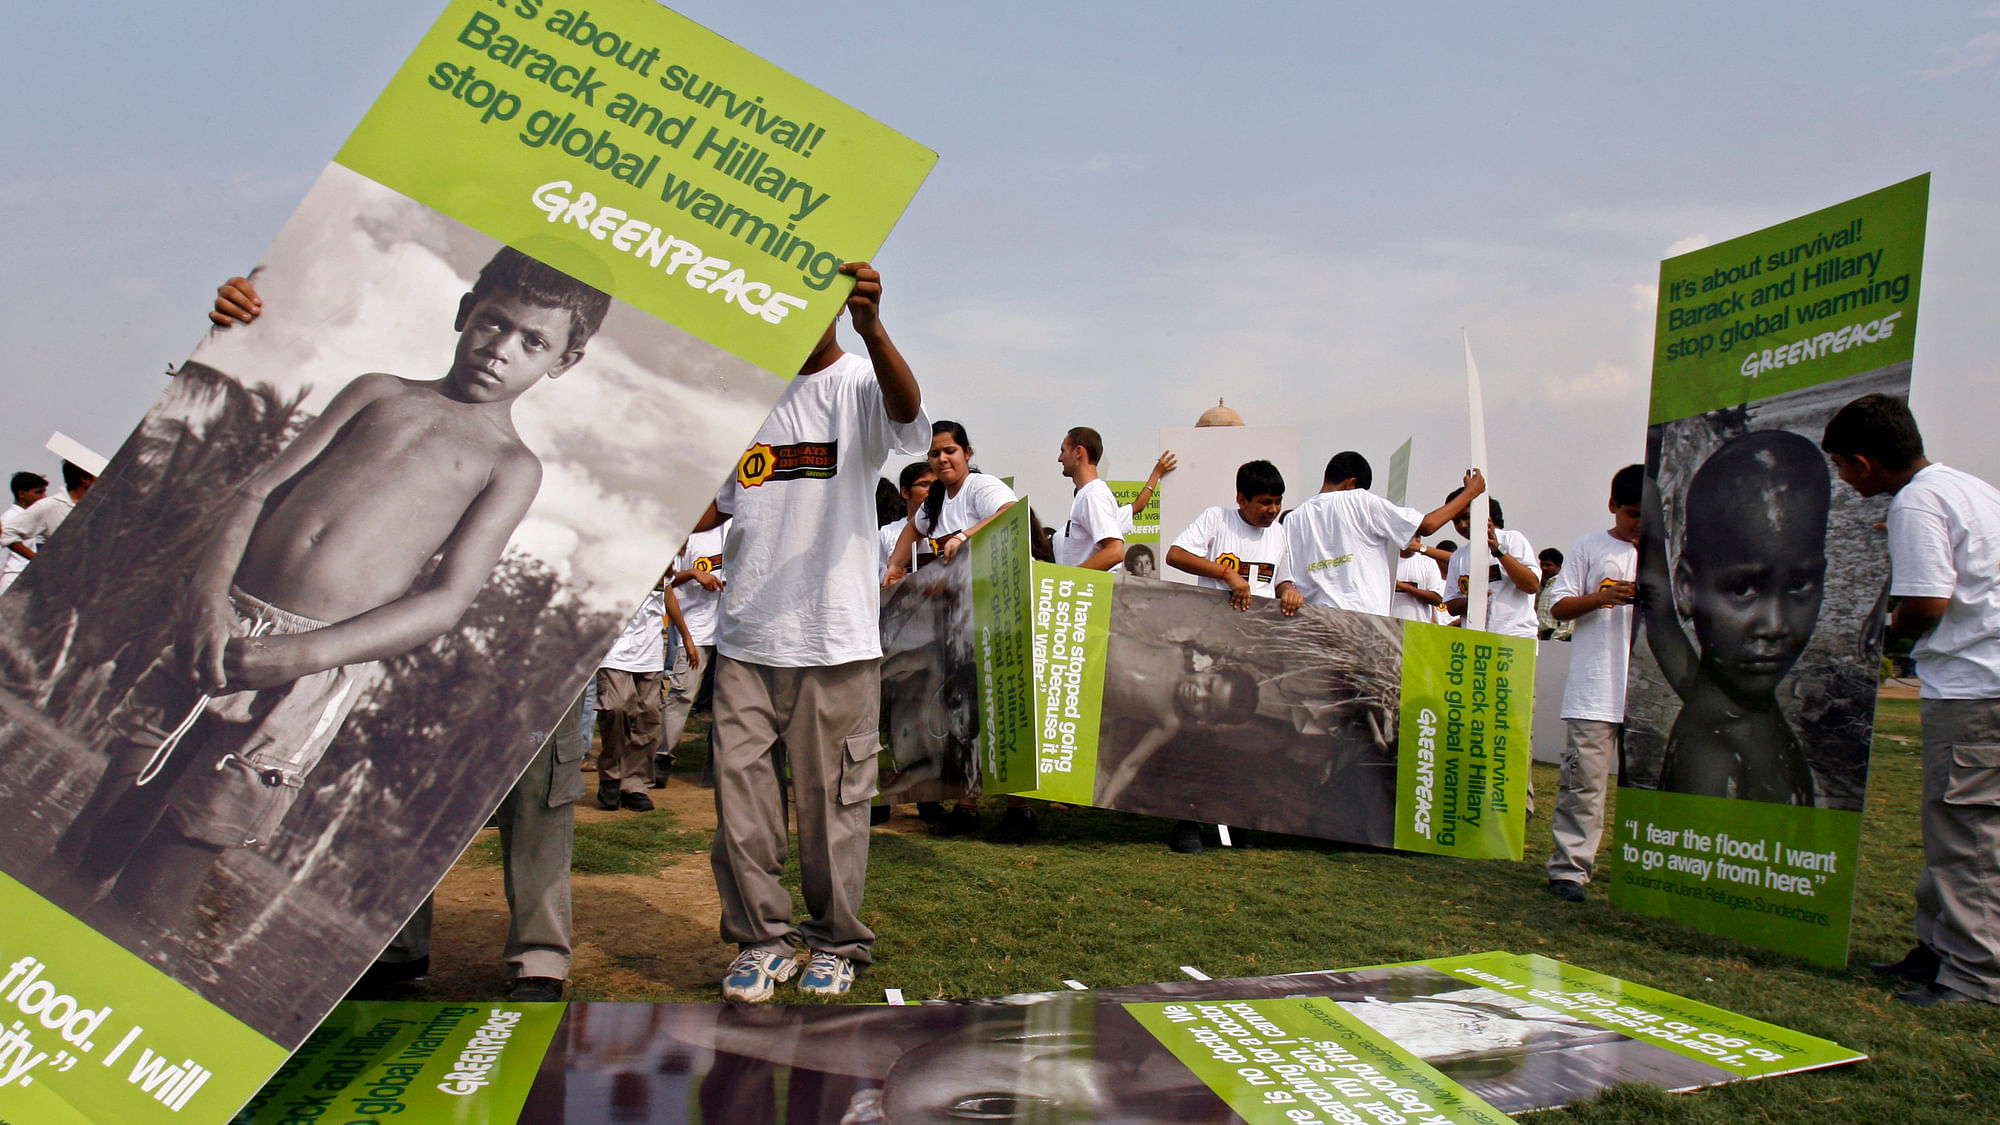  School children, brought together by Greenpeace for a climate change demonstration, carry placards near the venue where US Secretary of State Hillary Clinton is scheduled to meet India’s foreign minister in New Delhi July 20, 2009. (Photo: Reuters)